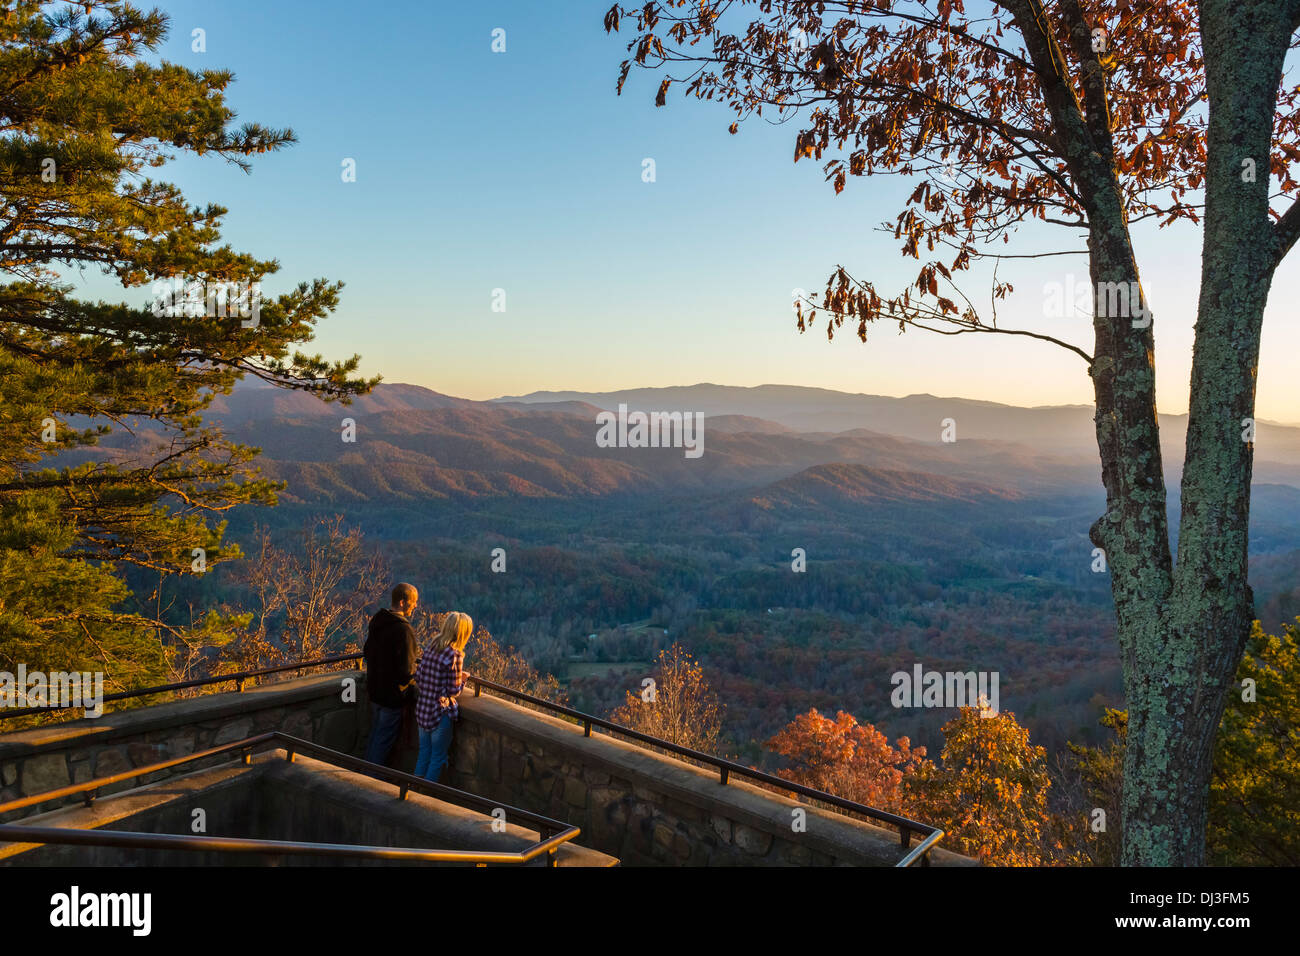 View over the Great Smoky Mountains National Park at sunset from Look Rock overlook, Foothills Parkway, Tennessee, USA Stock Photo